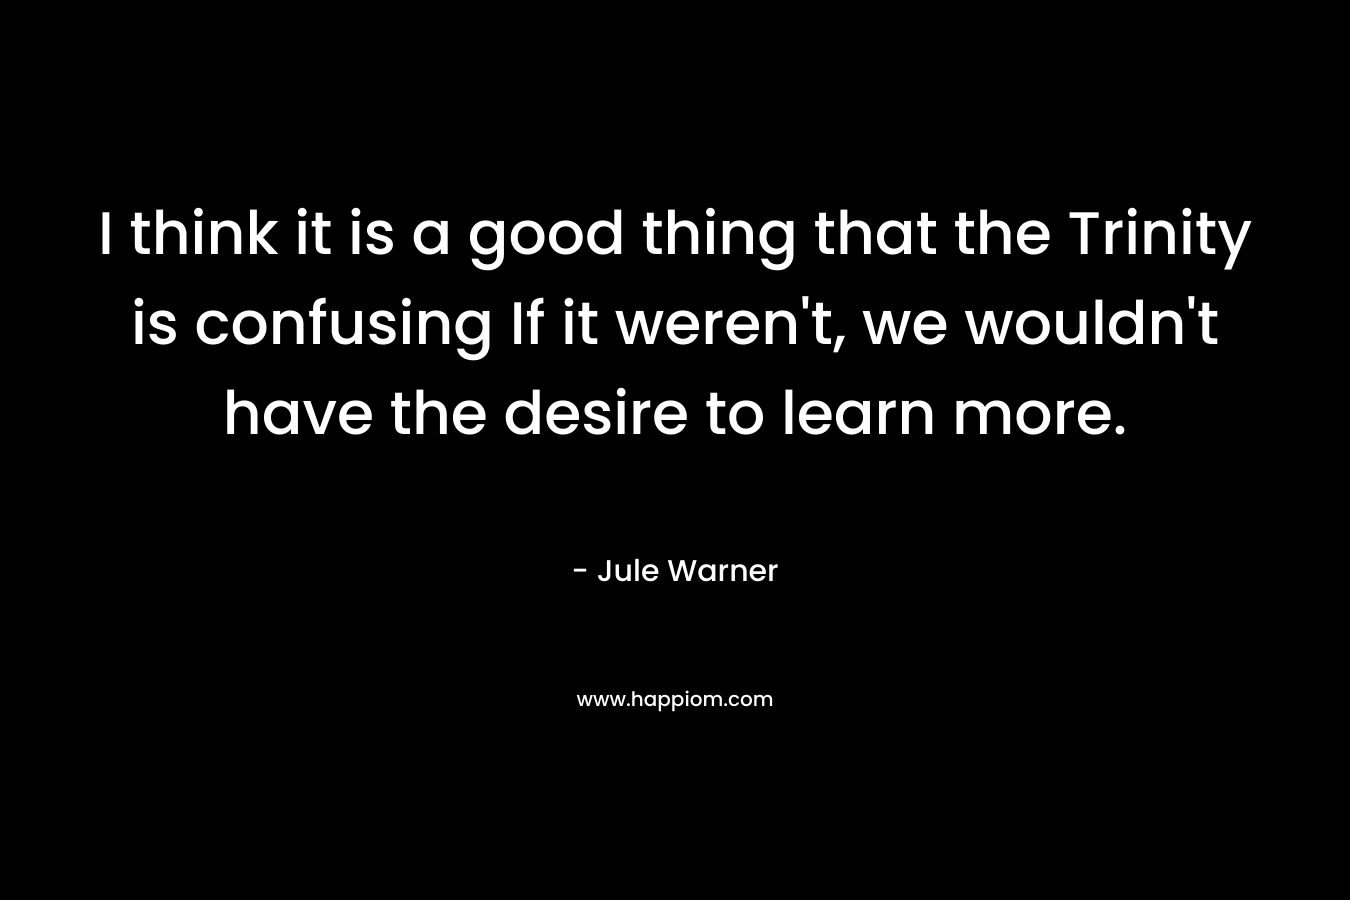 I think it is a good thing that the Trinity is confusing If it weren’t, we wouldn’t have the desire to learn more. – Jule Warner